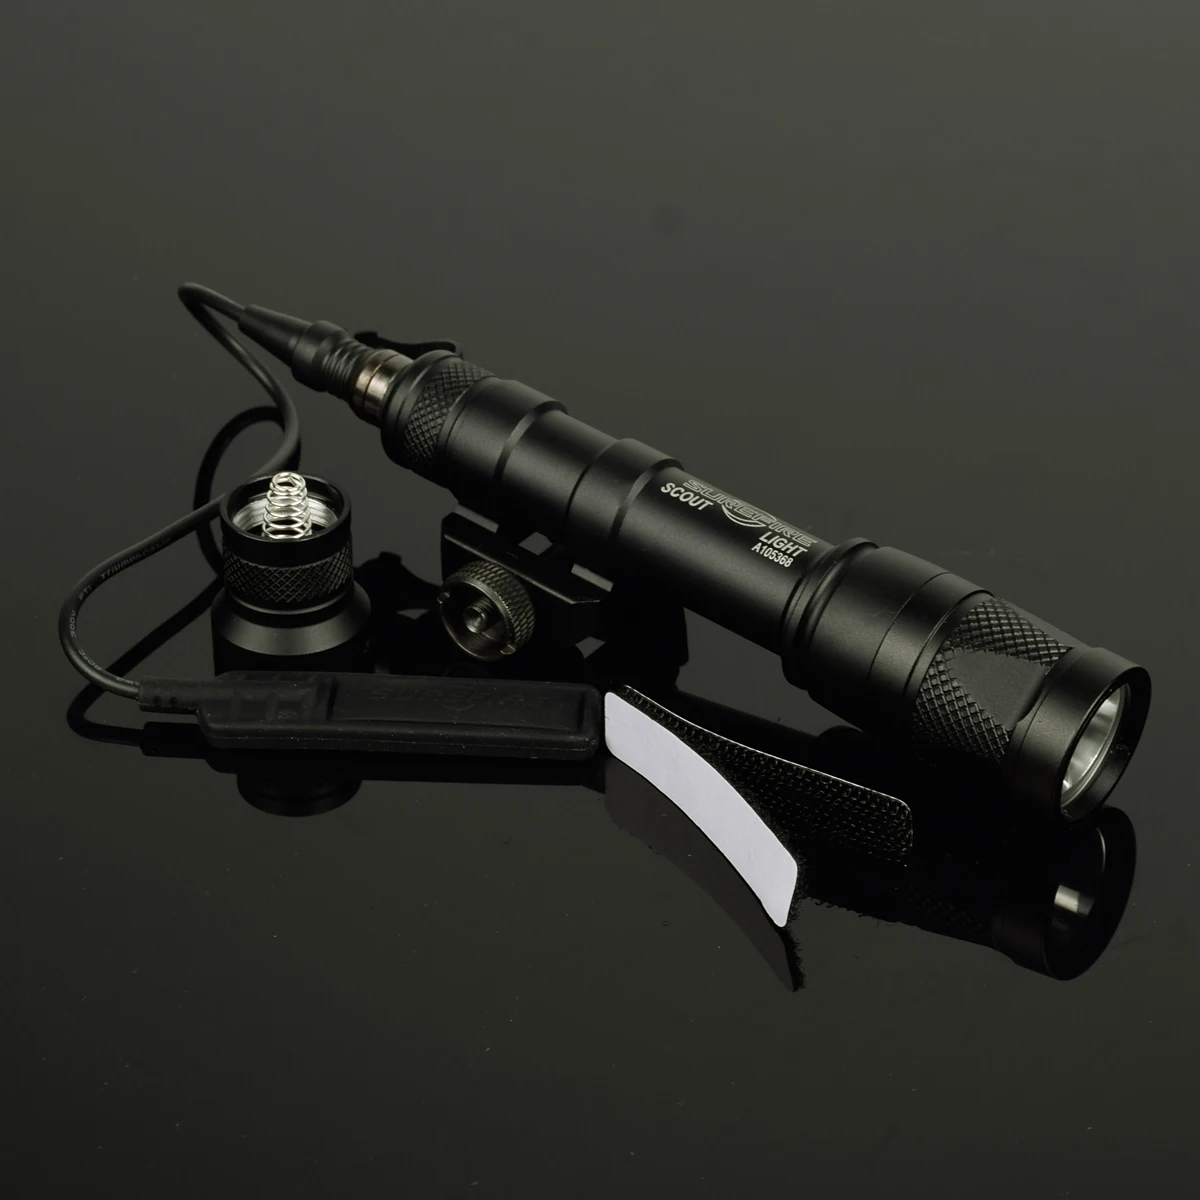 

Tactical M600 M600V Scout Light Hunting Strobe Flashlight Torch Gun Weapon Light Lantrena For Picatinny Rail with Tape Switch